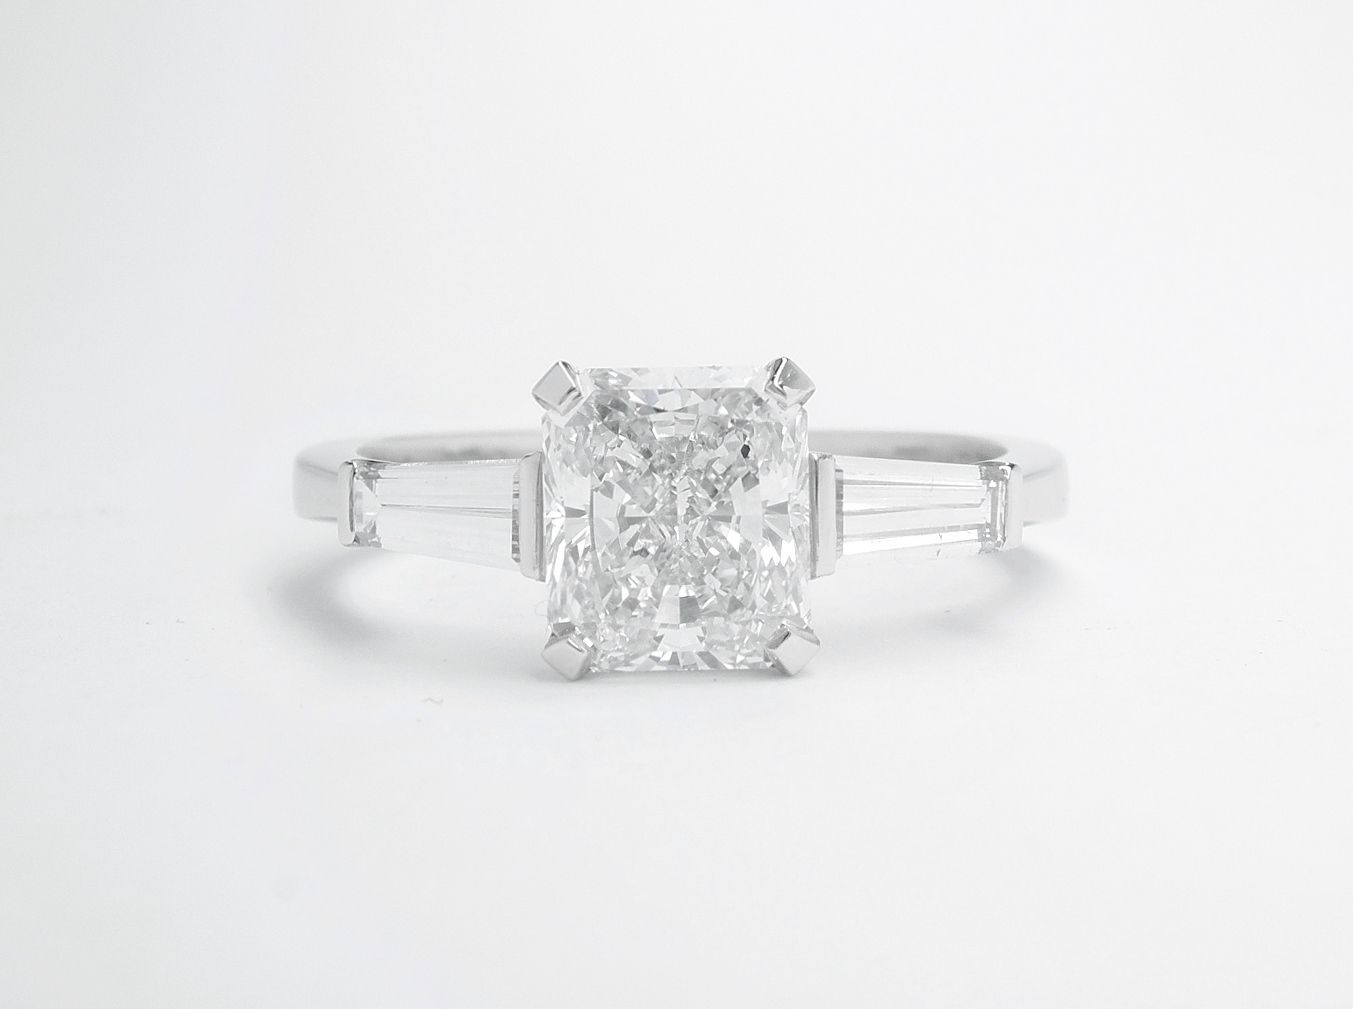 1.20ct. 'D' colour, VS2 clarity radiant cut diamond & tapered baguette diamond ring mounted in platinum.